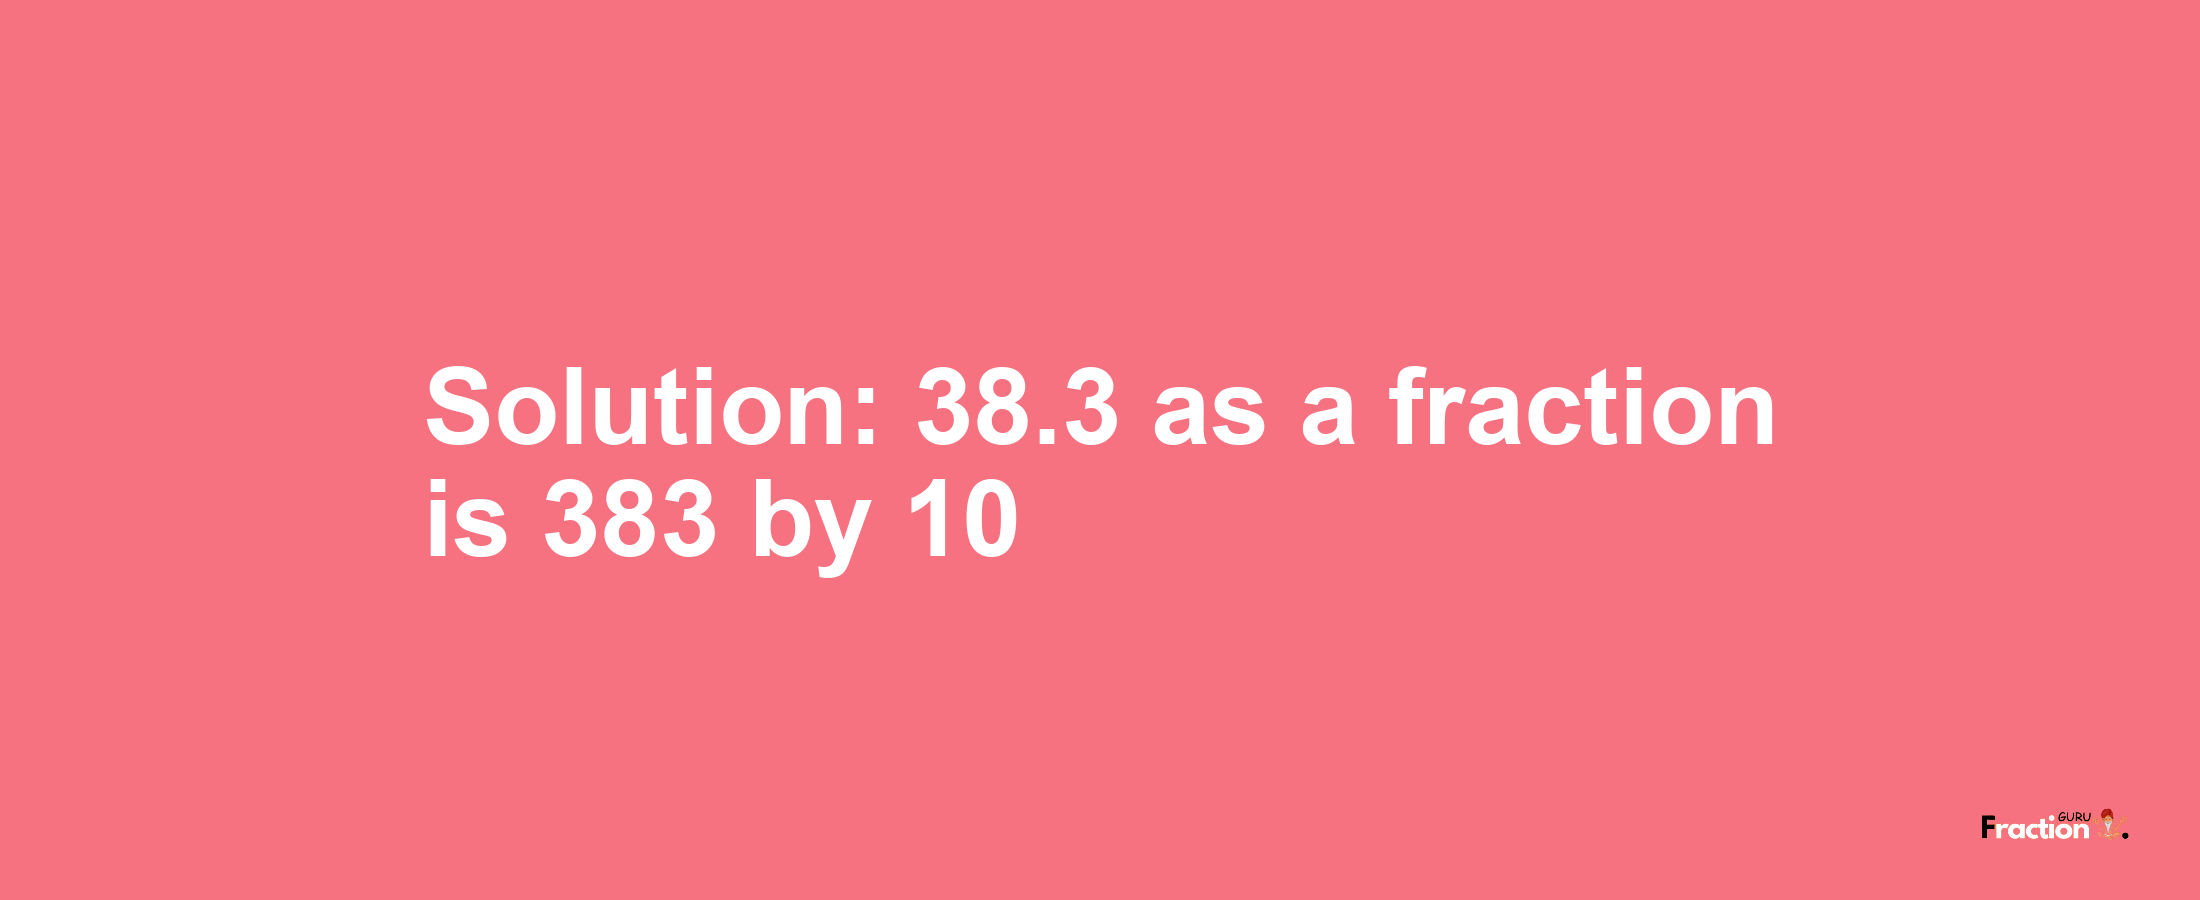 Solution:38.3 as a fraction is 383/10